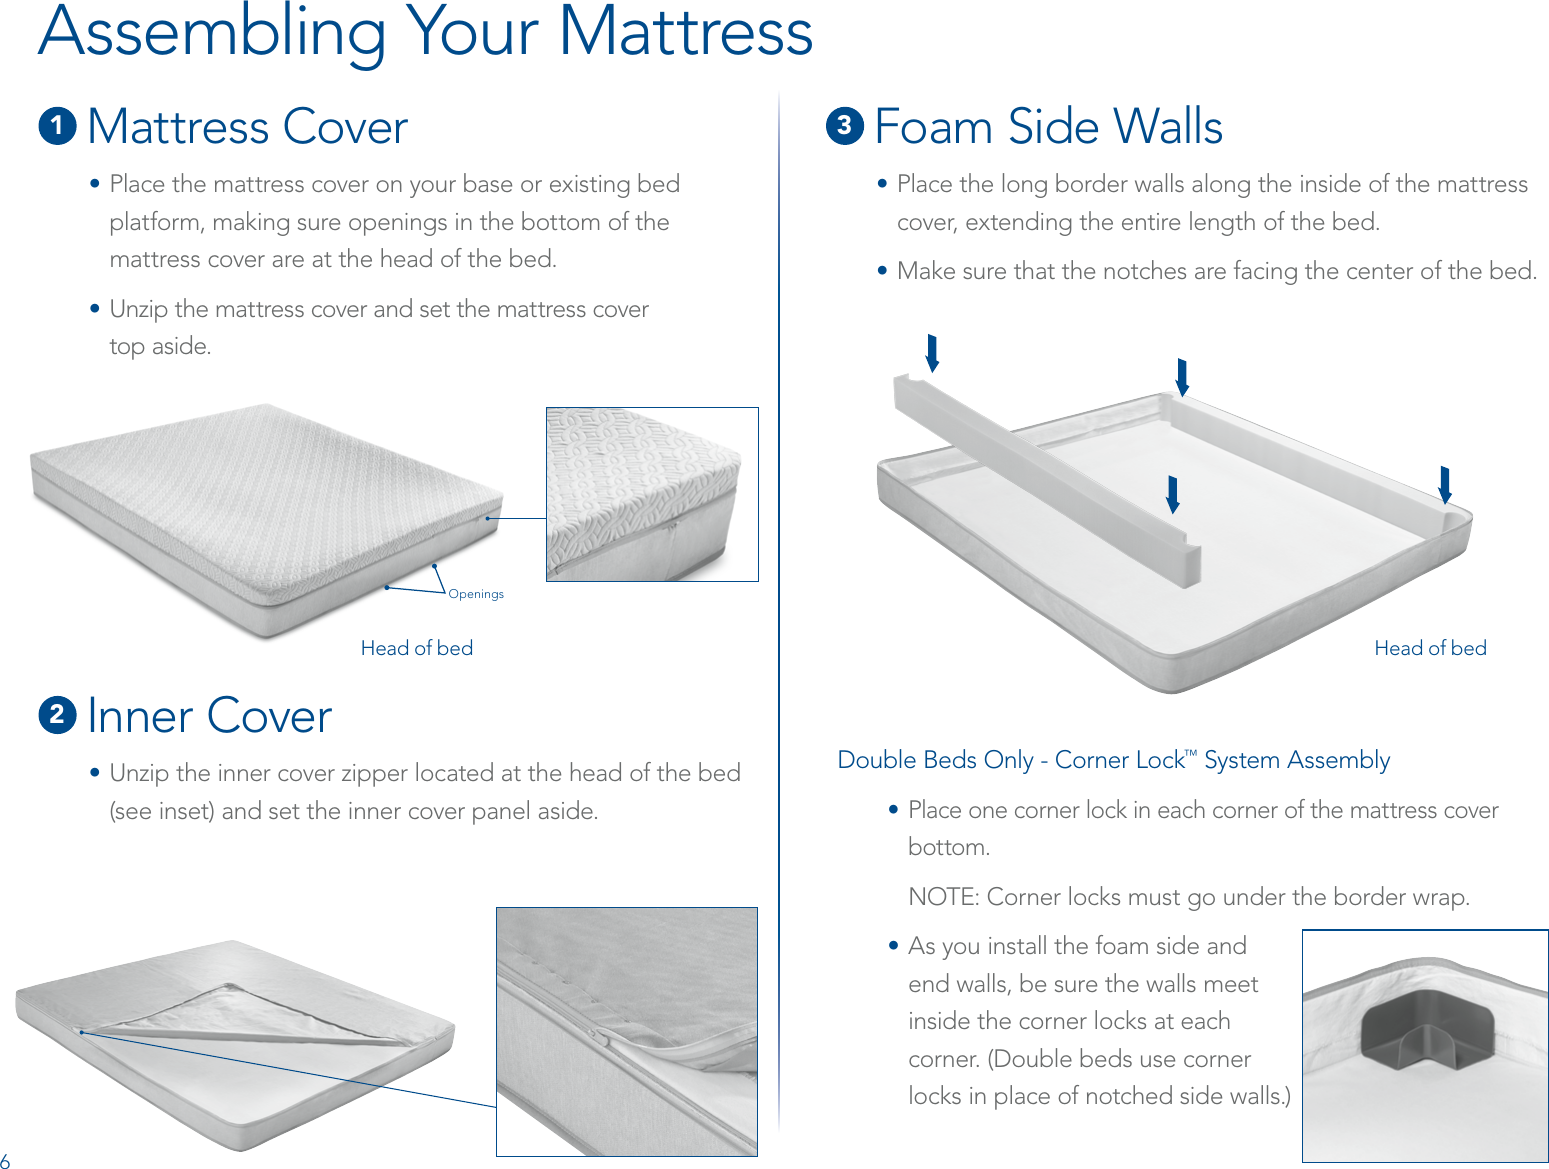 1 Mattress Cover• Place the mattress cover on your base or existing bed platform, making sure openings in the bottom of the mattress cover are at the head of the bed.• Unzip the mattress cover and set the mattress cover  top aside.2 Inner Cover•  Unzip the inner cover zipper located at the head of the bed  (see inset) and set the inner cover panel aside.3 Foam Side Walls•  Place the long border walls along the inside of the mattress cover, extending the entire length of the bed.• Make sure that the notches are facing the center of the bed.Assembling Your MattressDouble Beds Only - Corner Lock™ System Assembly• Place one corner lock in each corner of the mattress cover bottom.NOTE: Corner locks must go under the border wrap.• As you install the foam side and  end walls, be sure the walls meet  inside the corner locks at each  corner. (Double beds use corner  locks in place of notched side walls.)Head of bedOpeningsHead of bed6